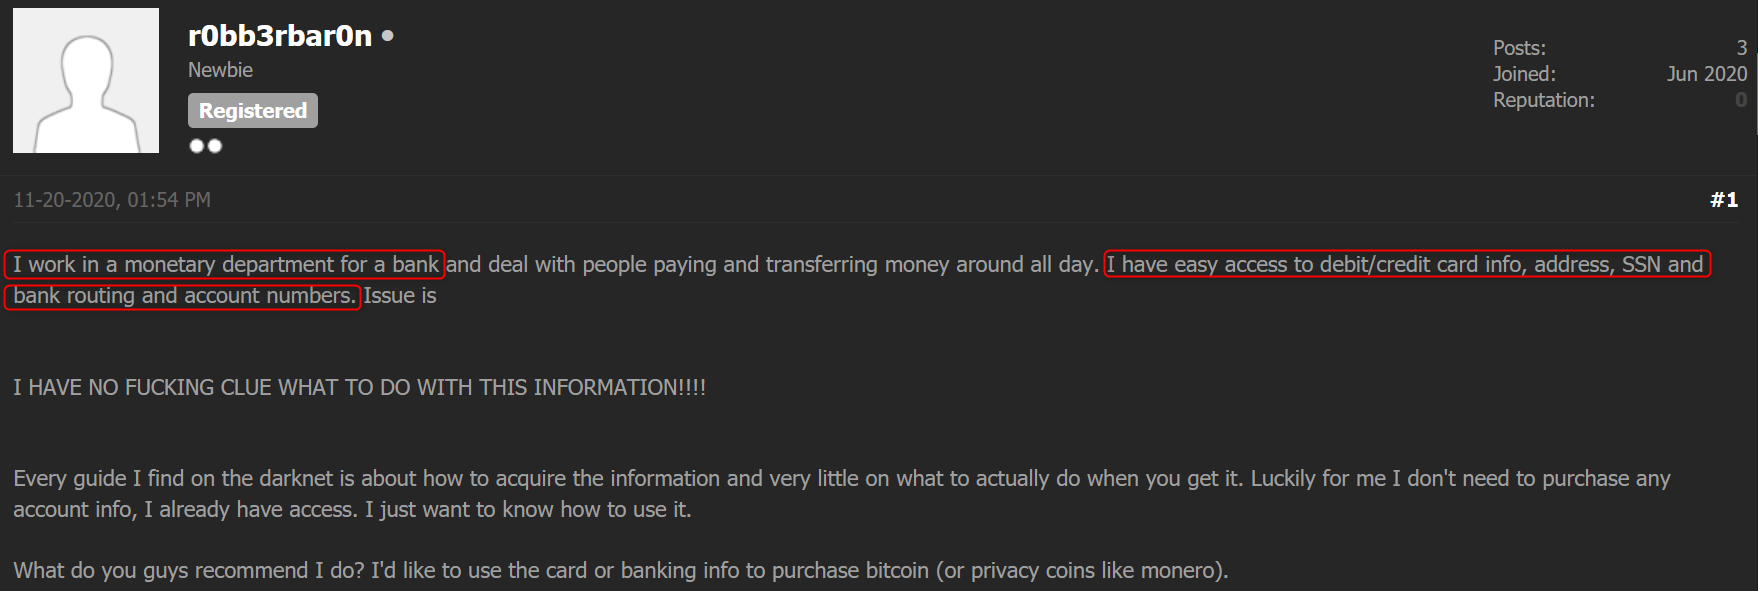 A post published on a dark web carding forum, CryptBB, where an insider working for a bank says he is planning to abuse his access to sensitive information